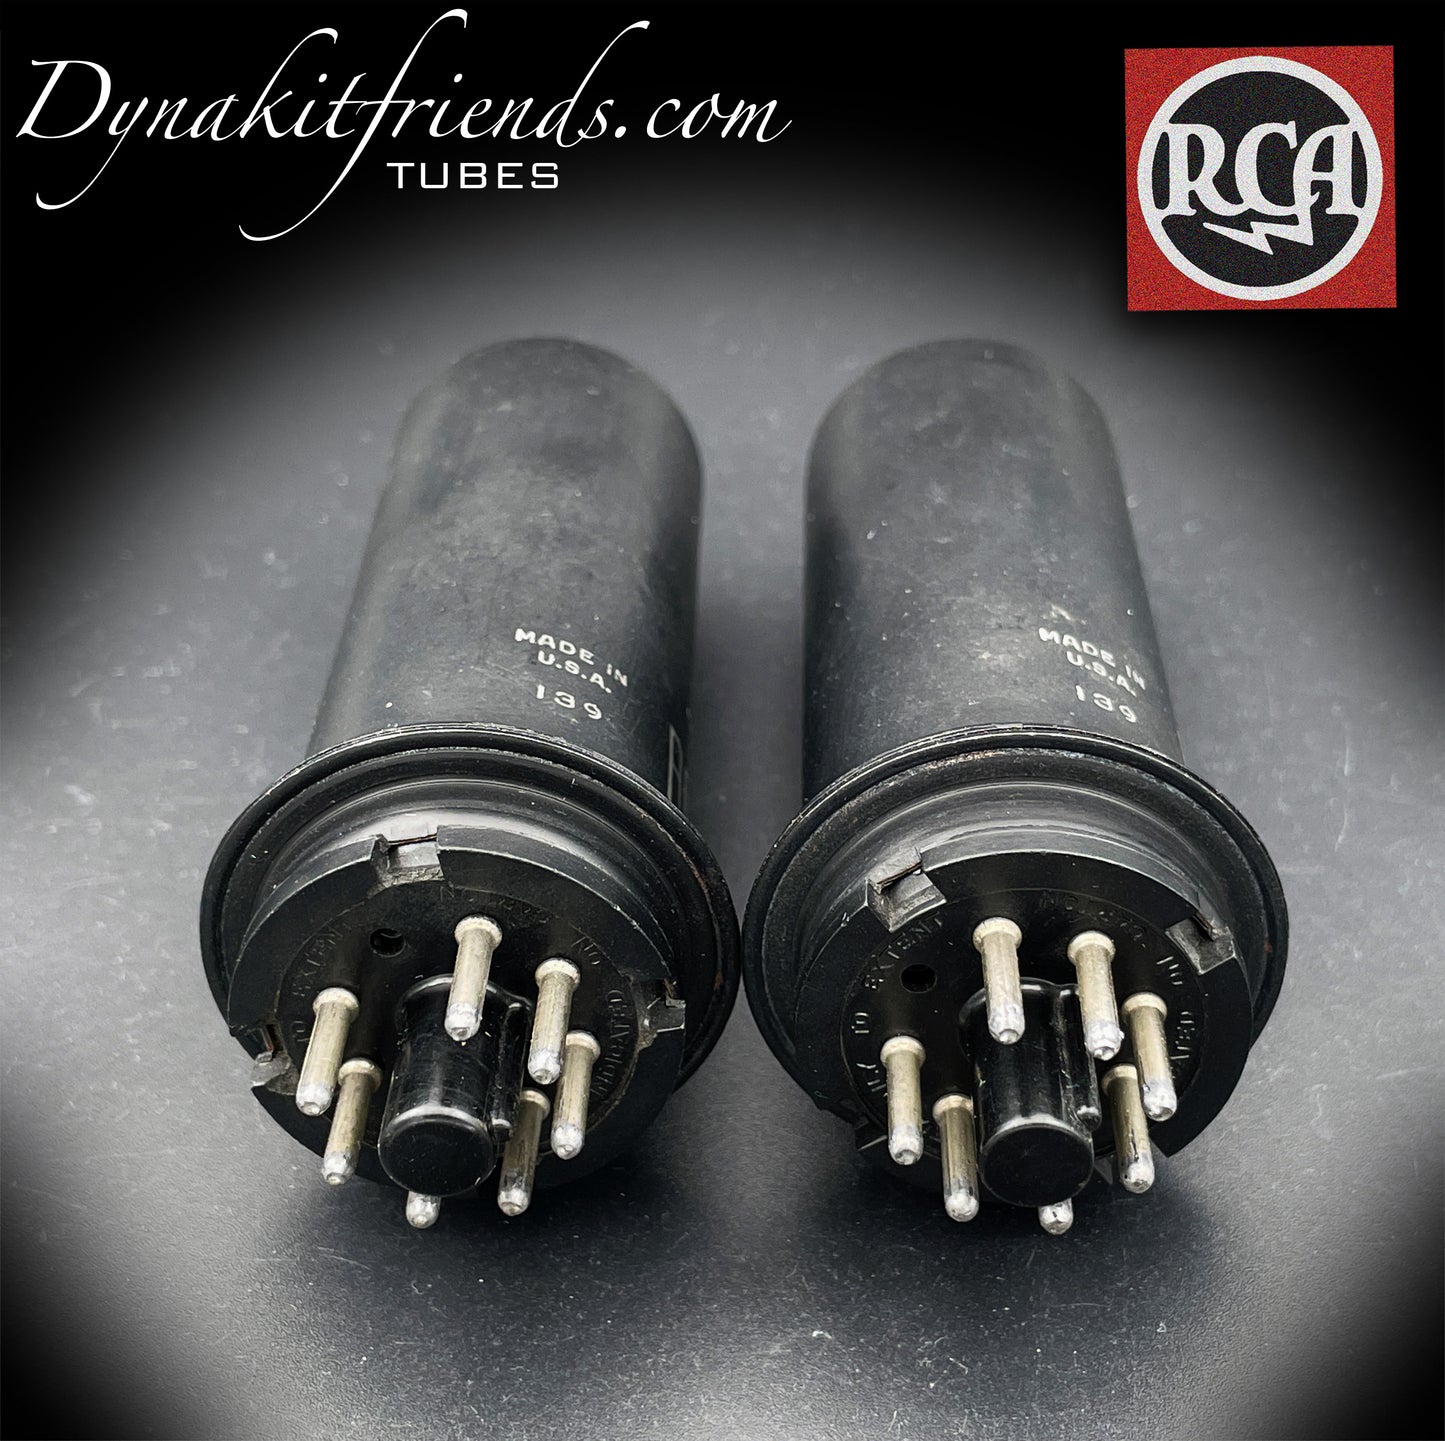 6L6 RCA NOS Metal Can Matched Pair Tubes Same Data Codes Made in USA nel 1951